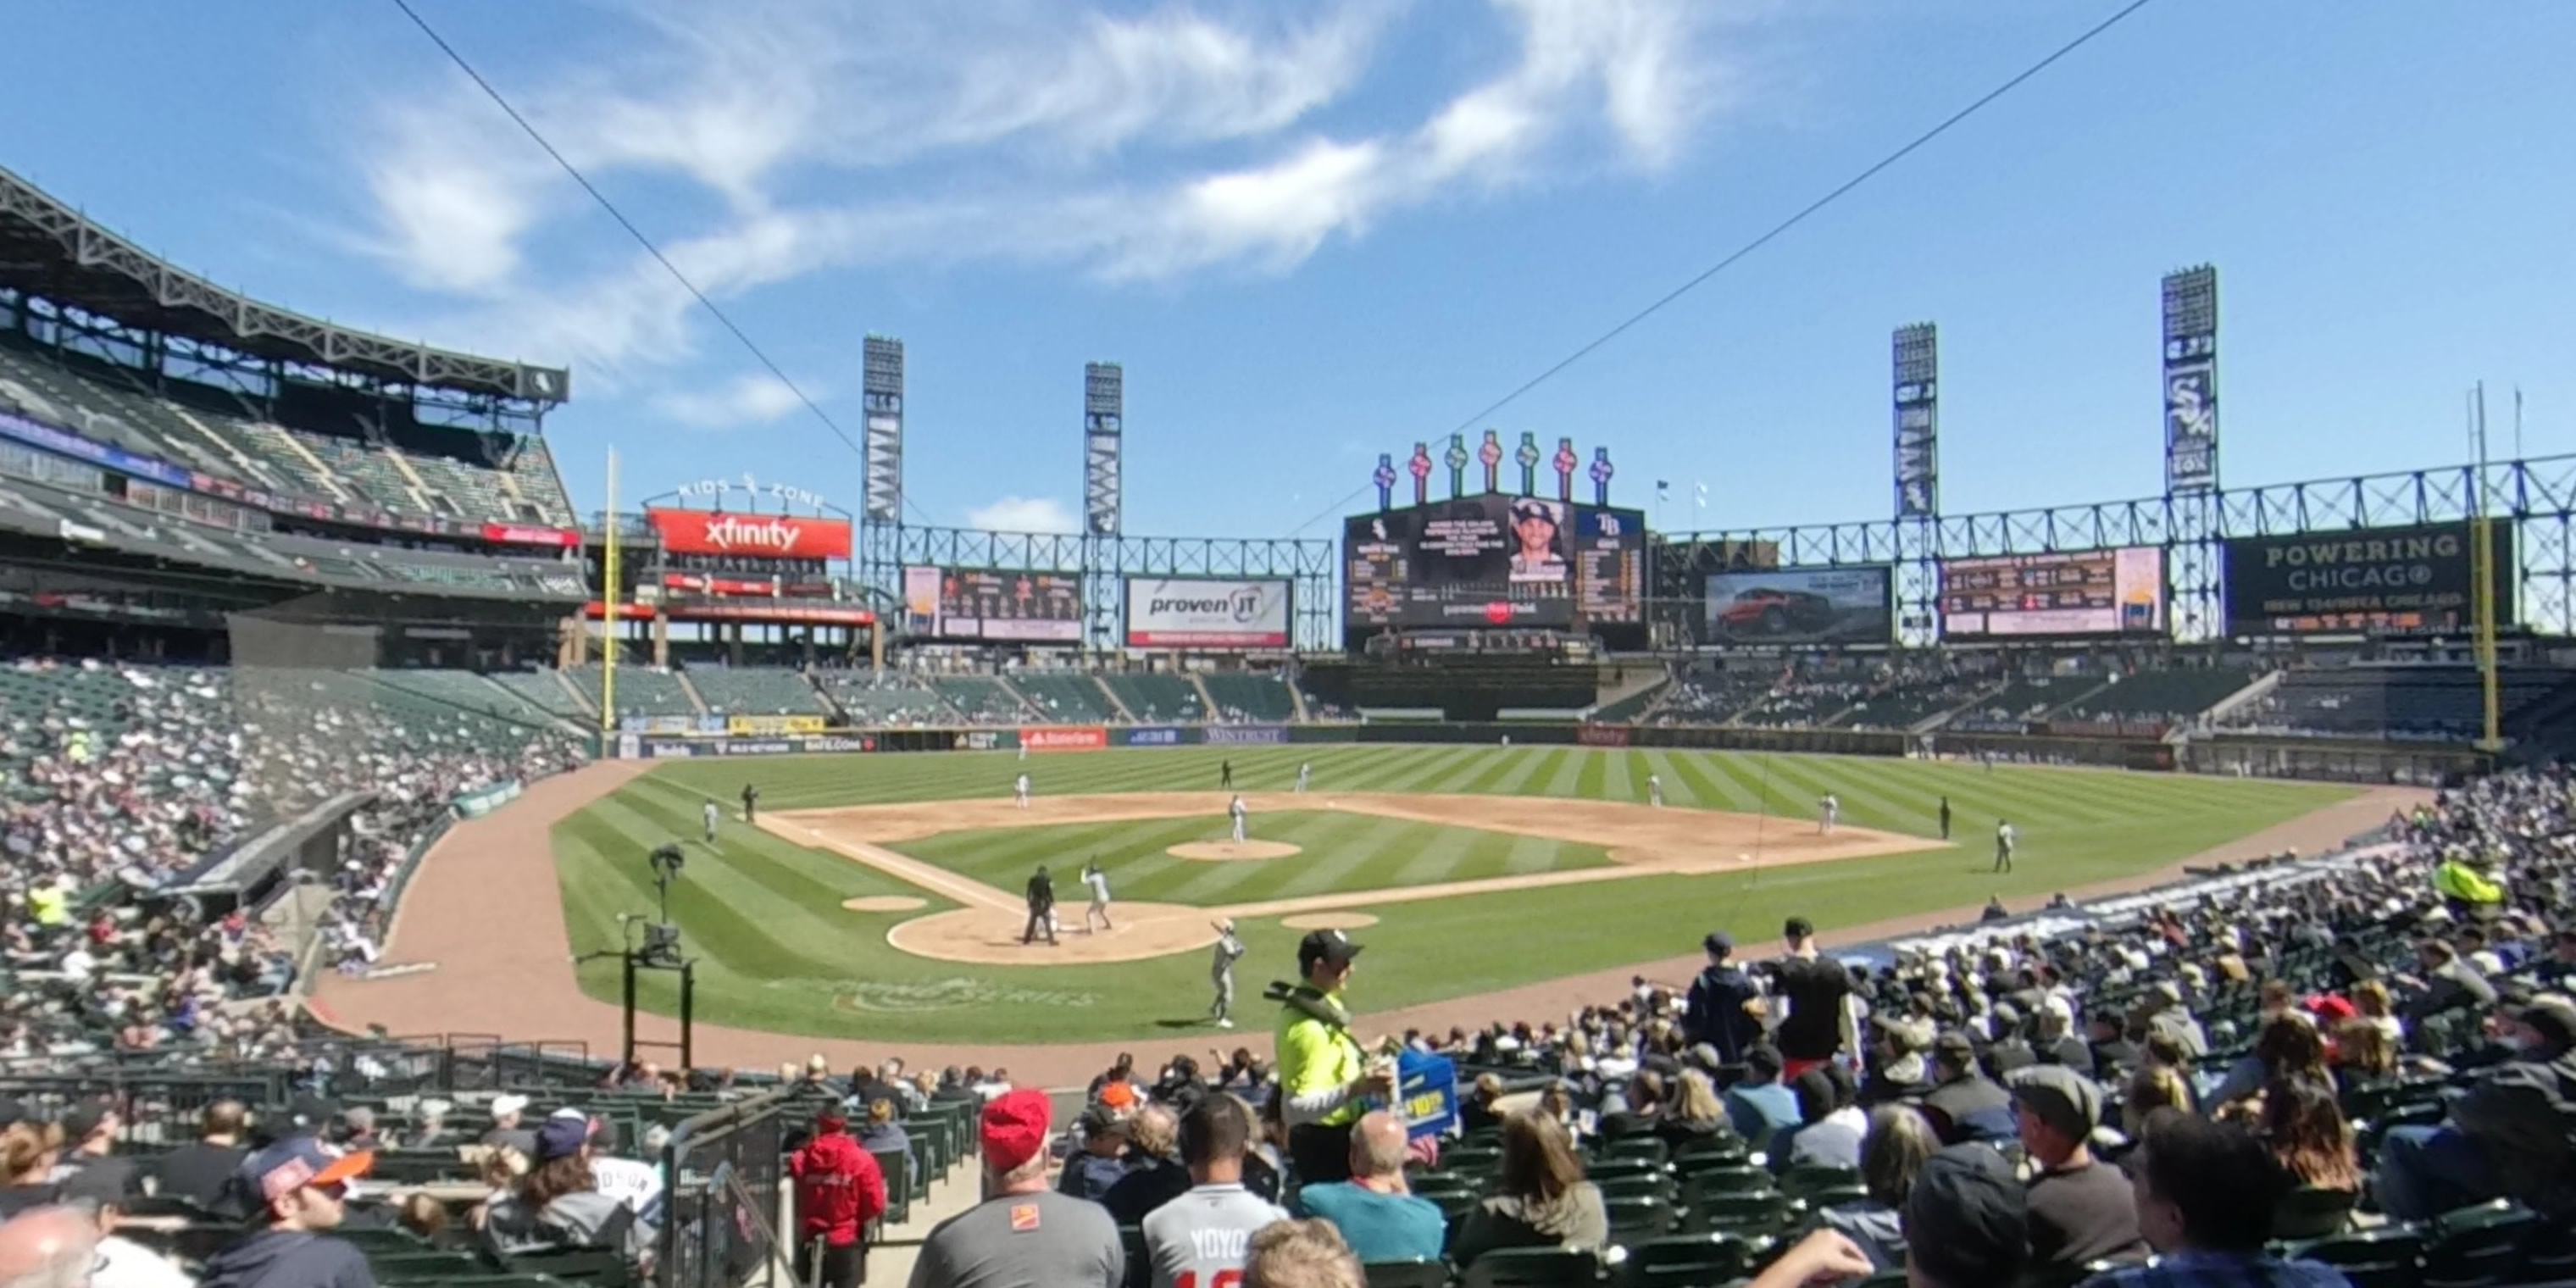 section 130 panoramic seat view  - guaranteed rate field